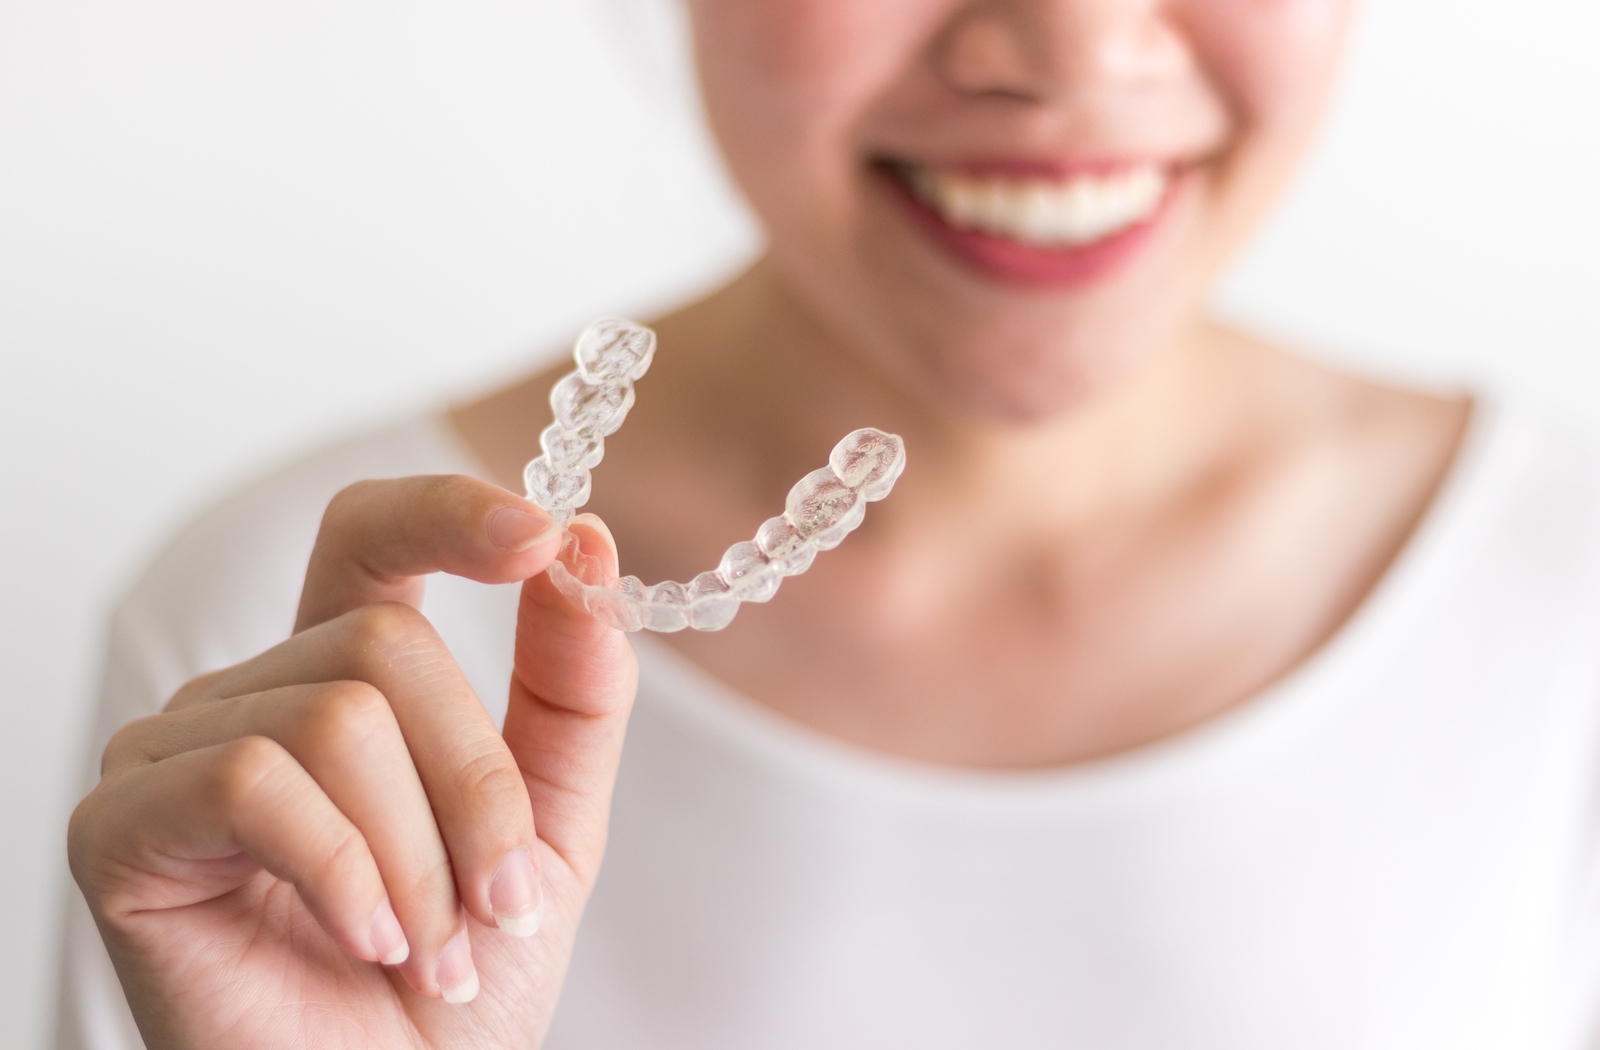 A woman smiling, blurred in the background holding an Invisalign that is in focus